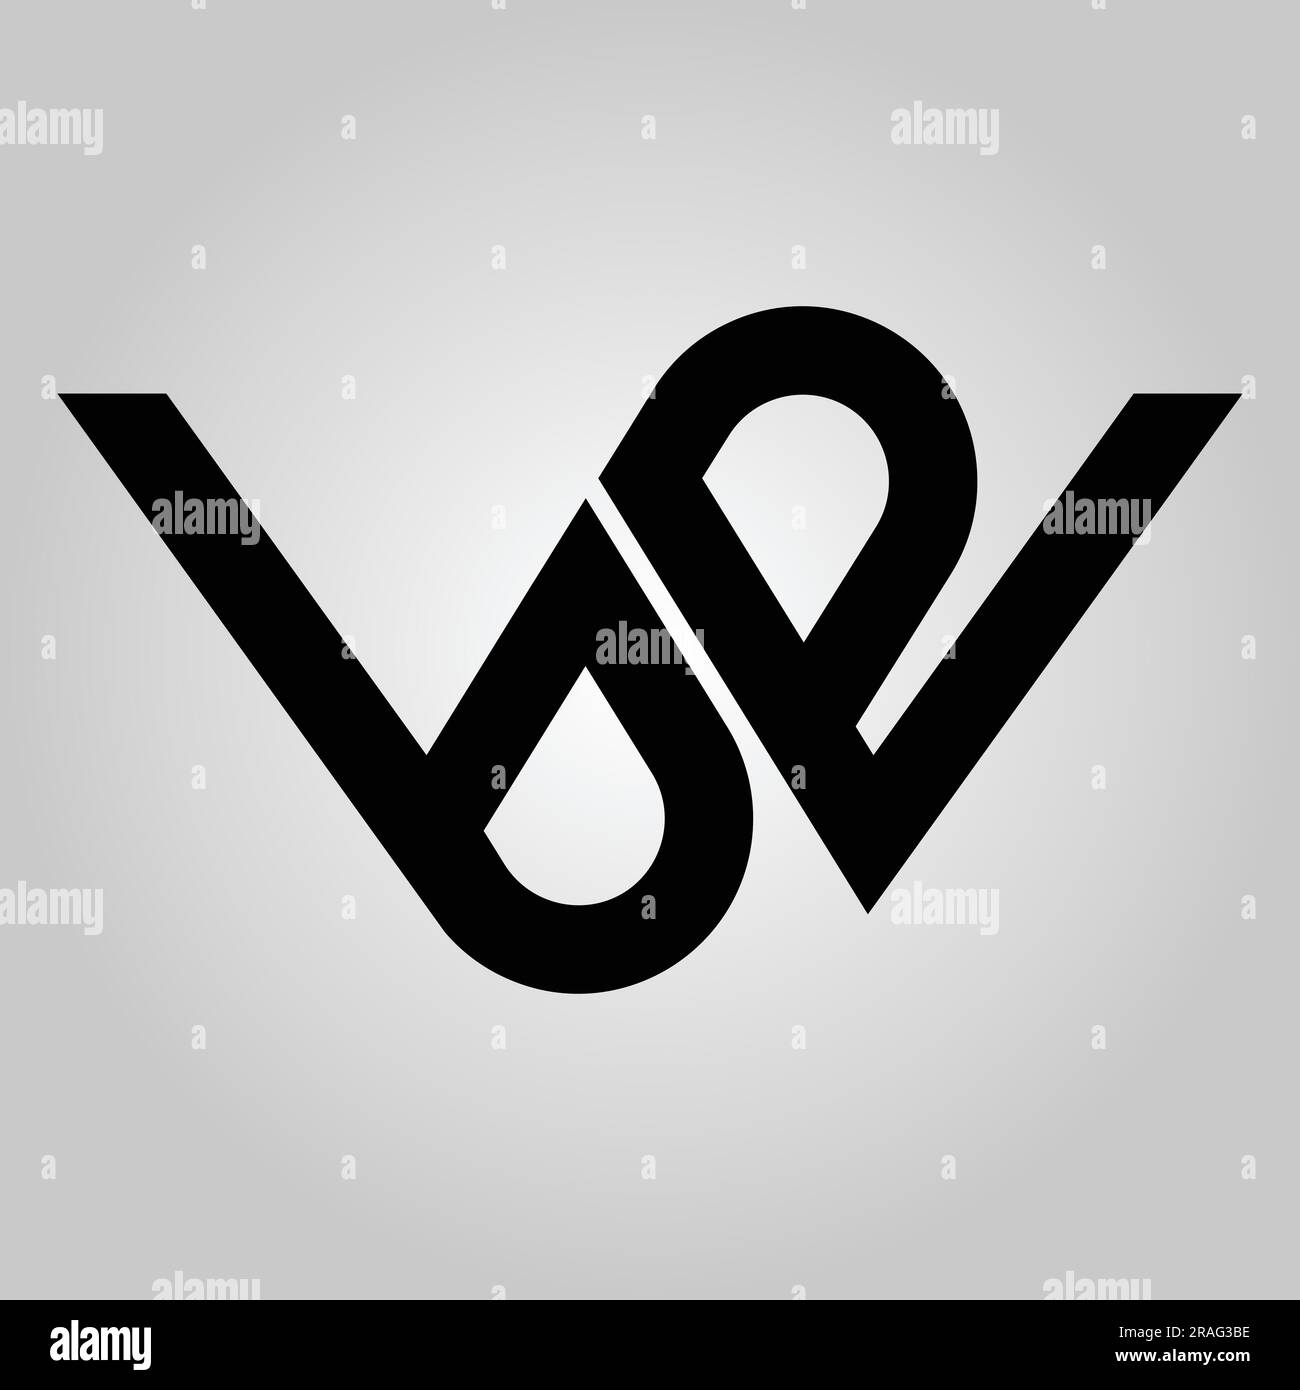 Initial WB logo design with Shape style, Logo business branding